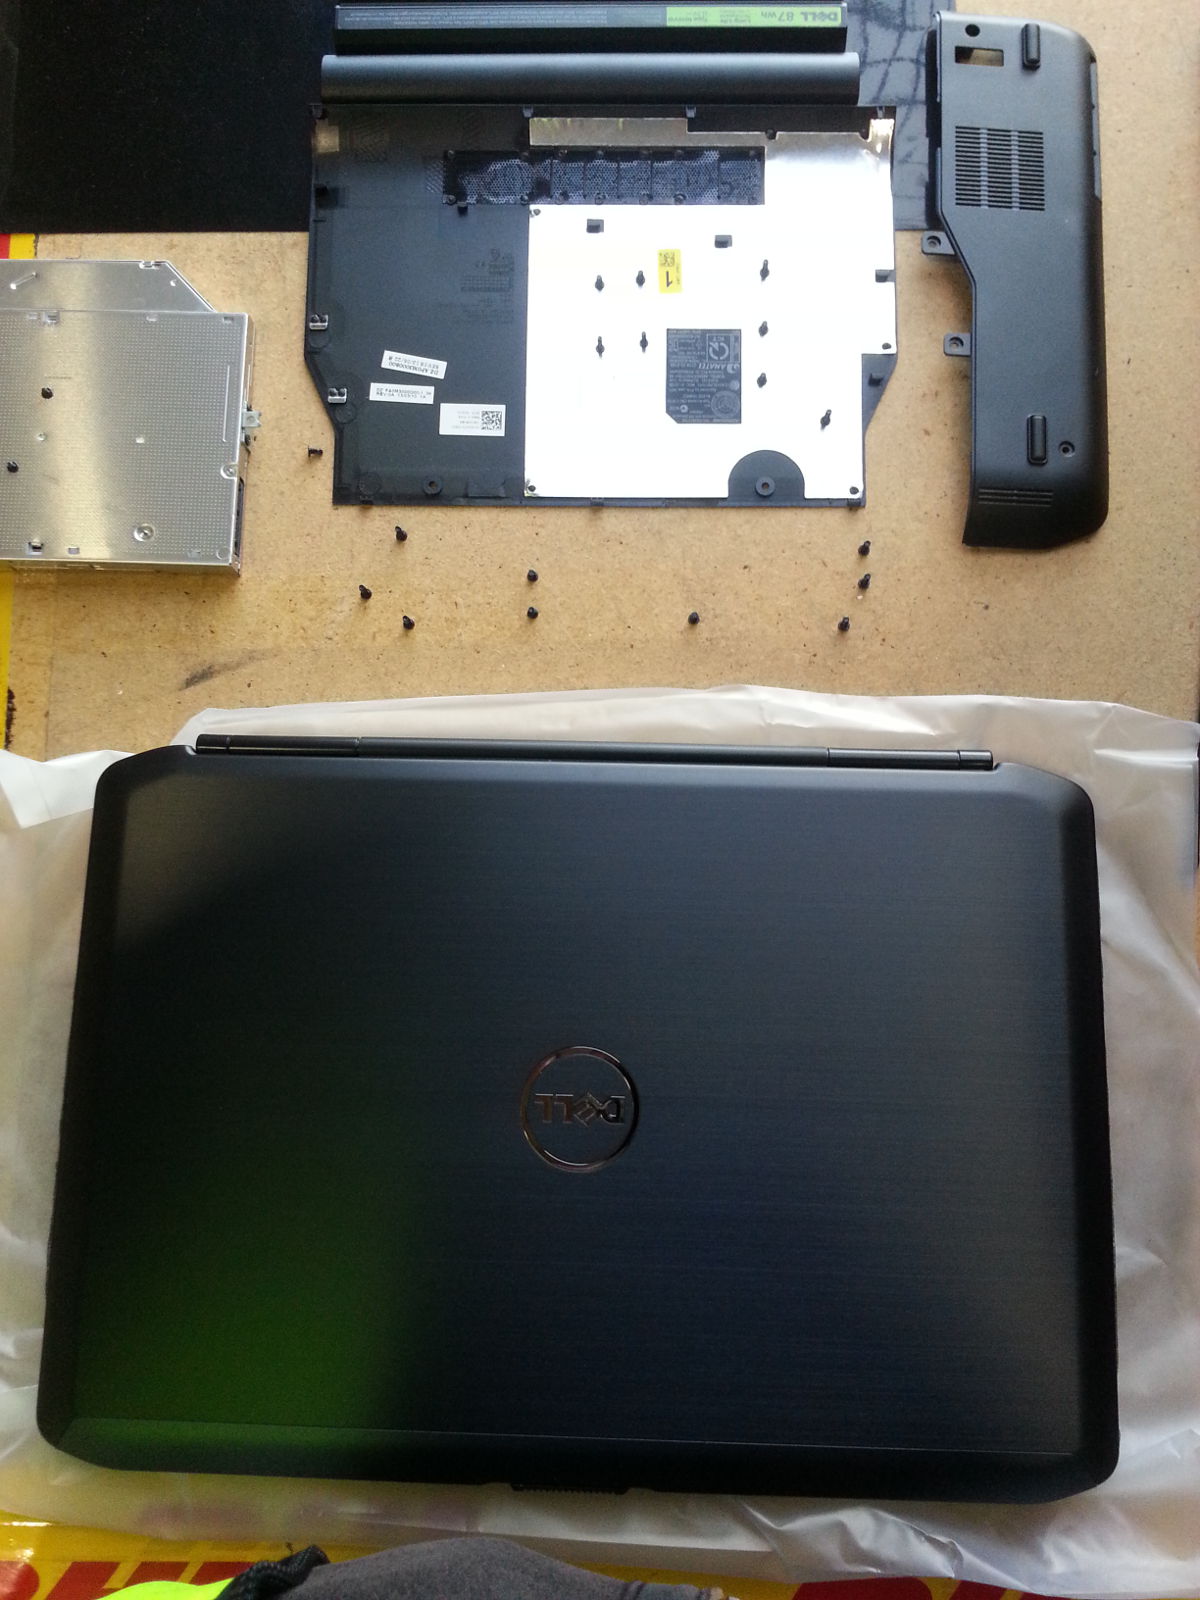 Top of Dell Latitude E5430v with screws laid out nicely